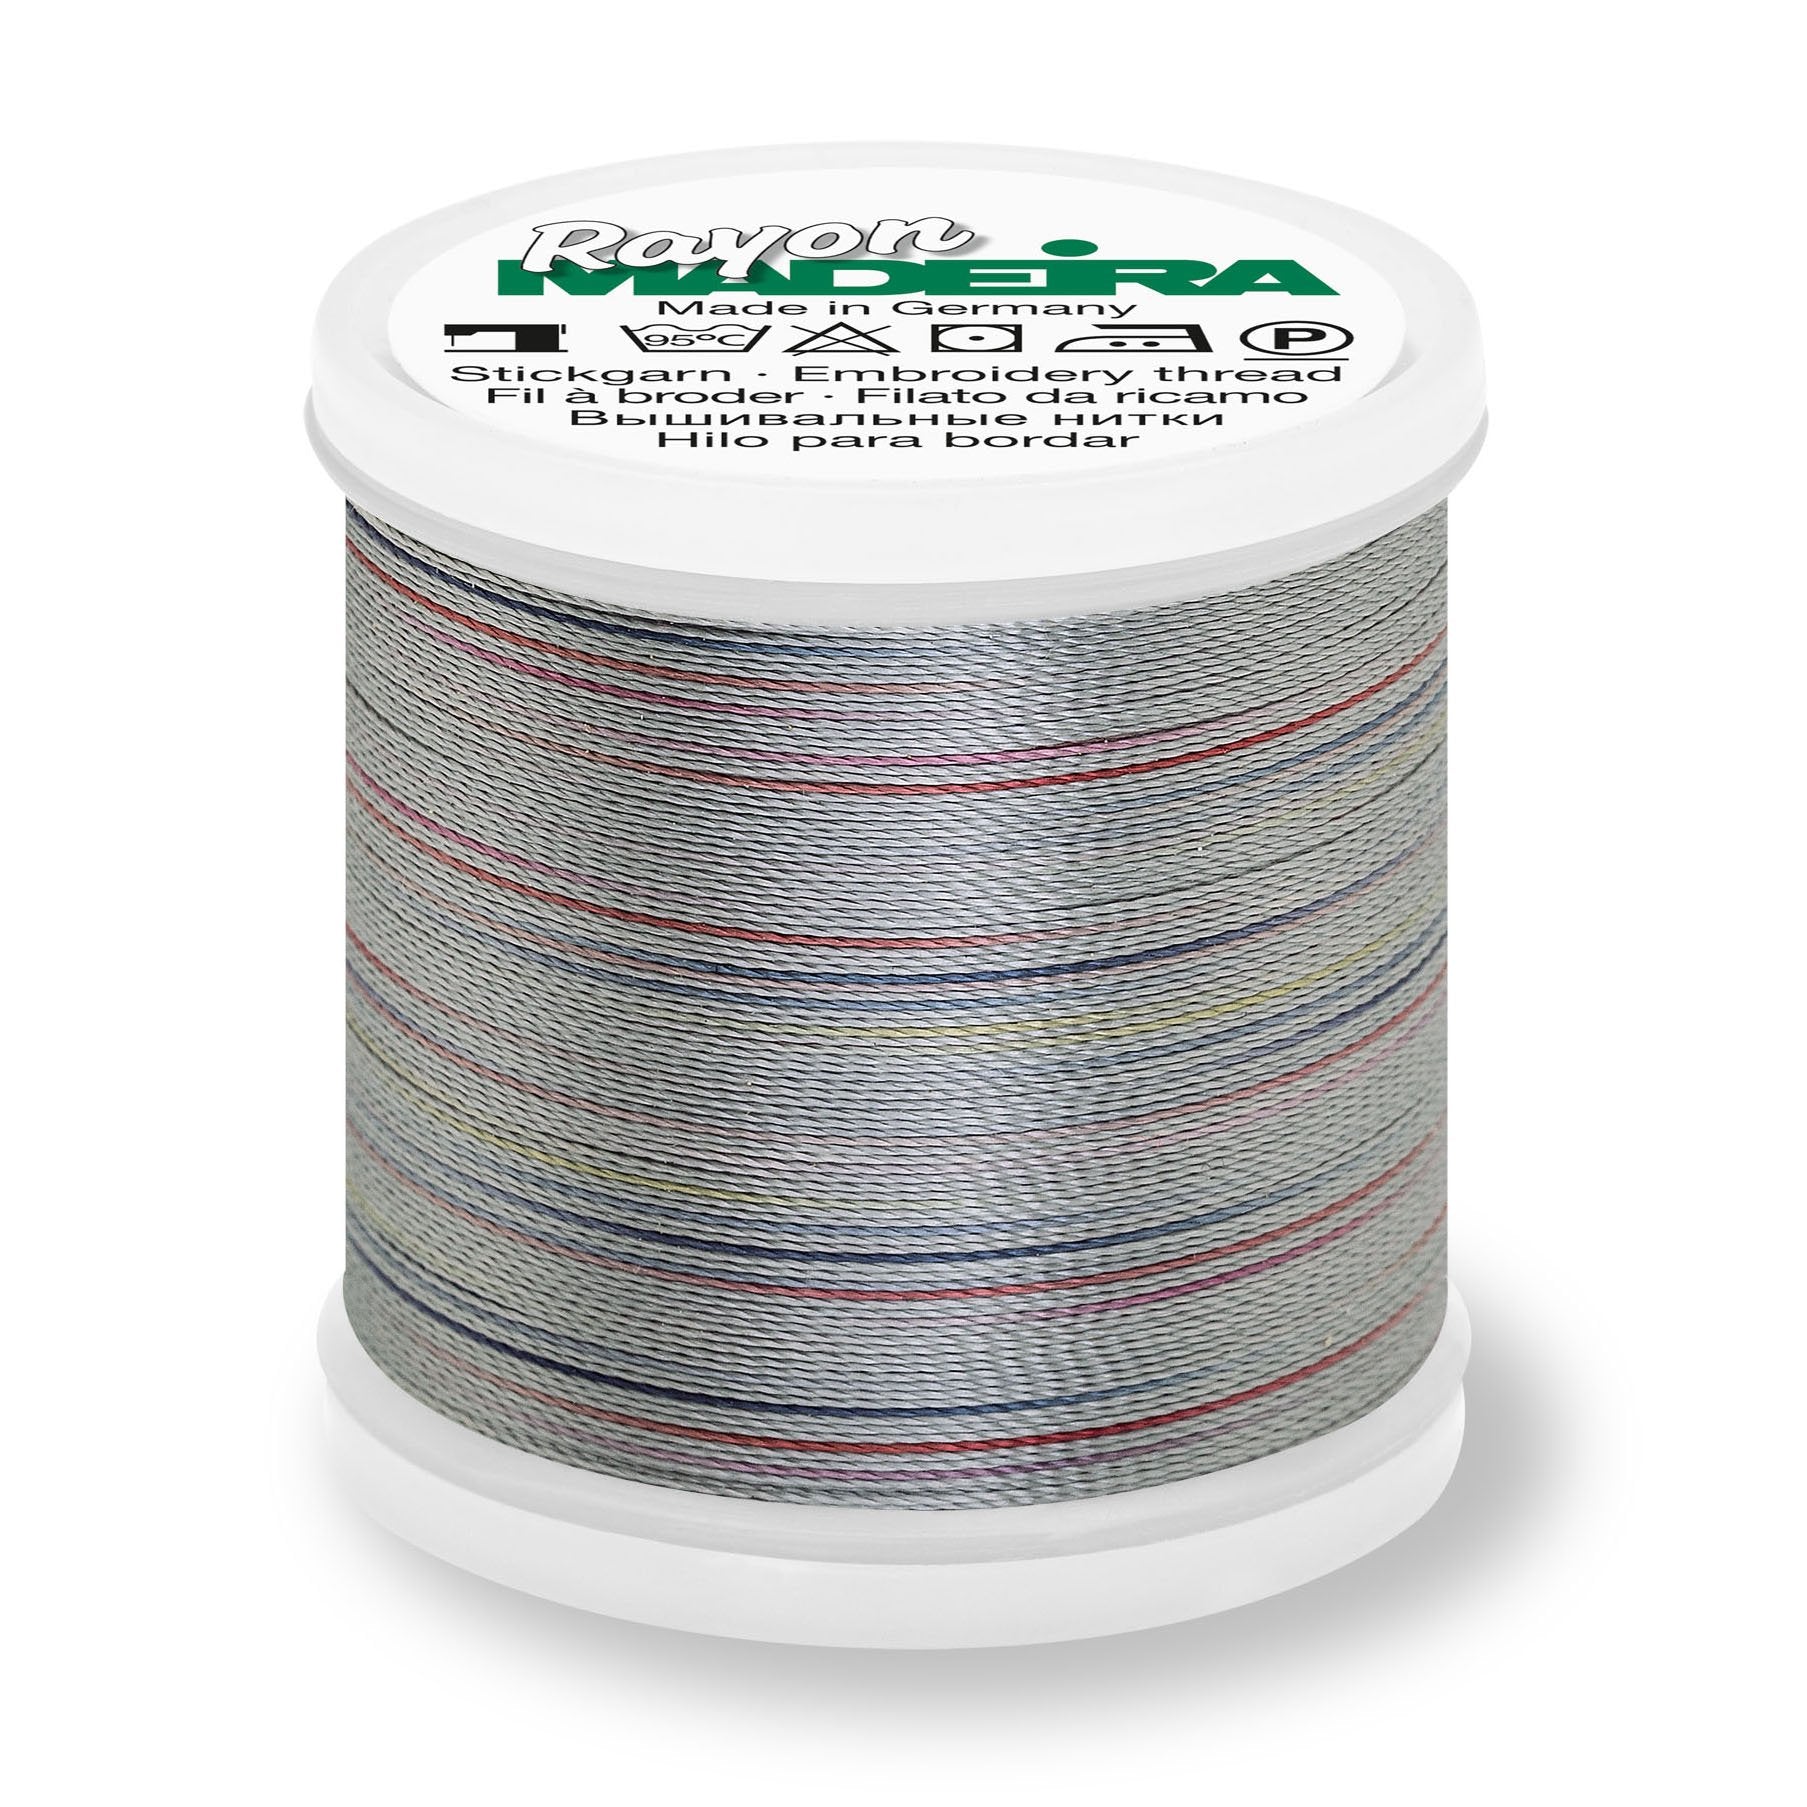 Madeira Rayon 40 Embroidery Thread 200m Potpourri 2312 Rainy Grey from Jaycotts Sewing Supplies